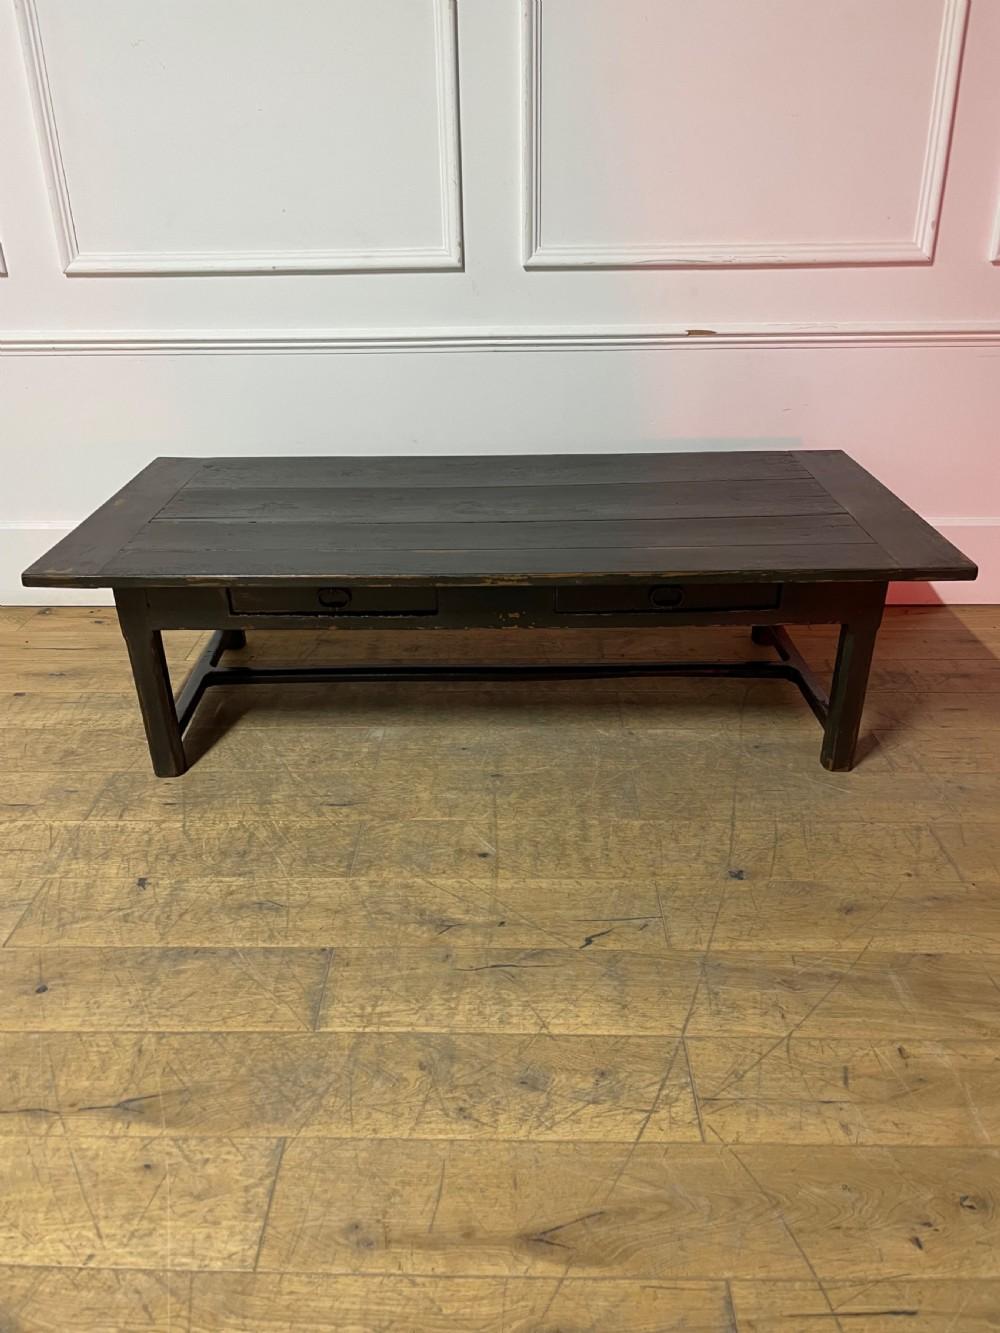 19th century oak farmhouse coffee table, two short drawers.French circa 1880.Painted with a black chalk paint having a distressed finish.
Height 19 inches or 48 cms
Length 69 inches or 176 cms
Depth 33.5 inches or 85 cms